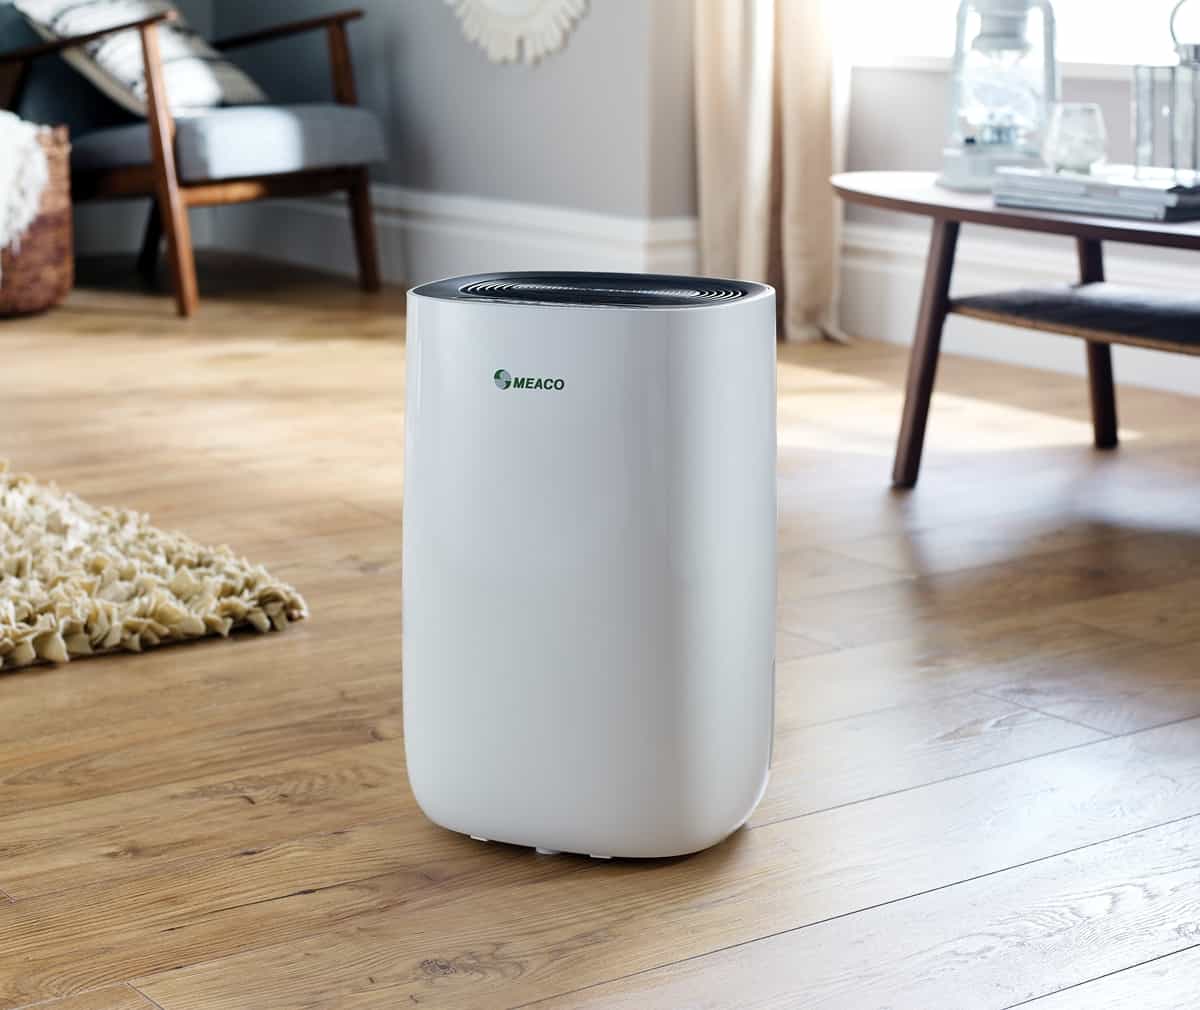 Auto De-Frost Meaco MeacoDry Dehumidifier ABC Range 12LW Energy Efficient Auto-off Ultra-Quiet Ideal for Damp and Condensation in the Home White Laundry Mode